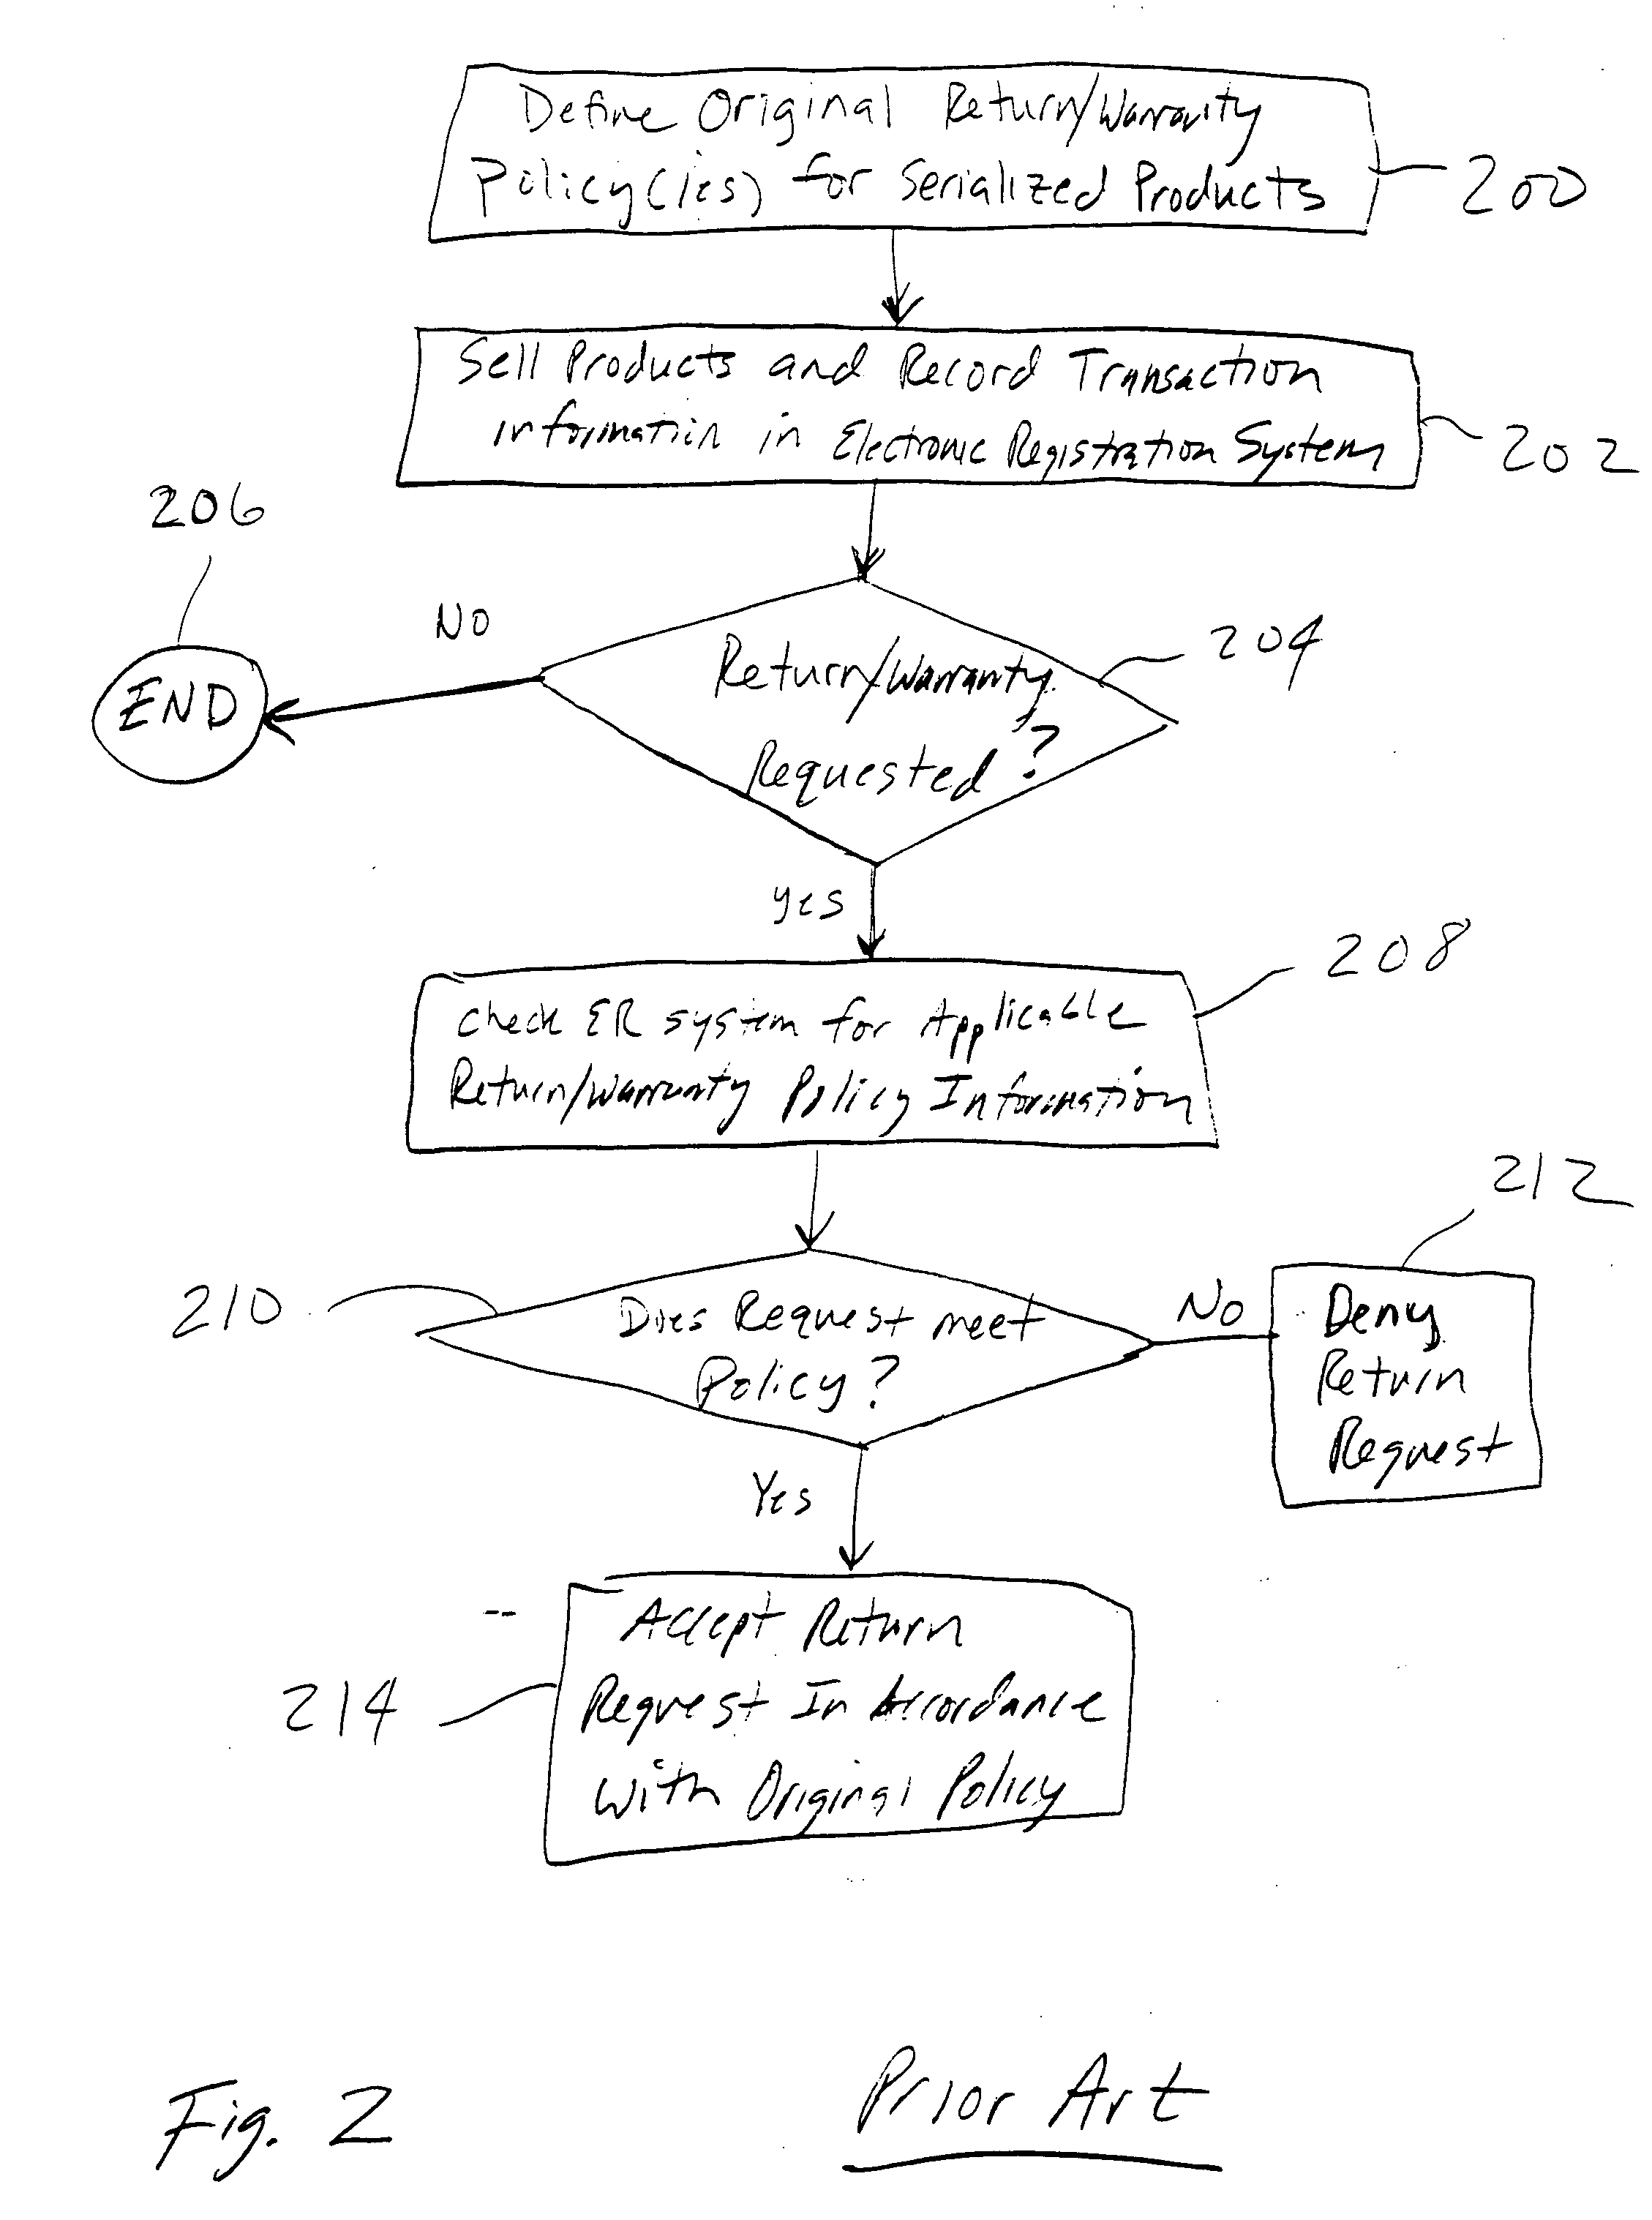 Systems and methods for product authentication and warranty verification for online auction houses